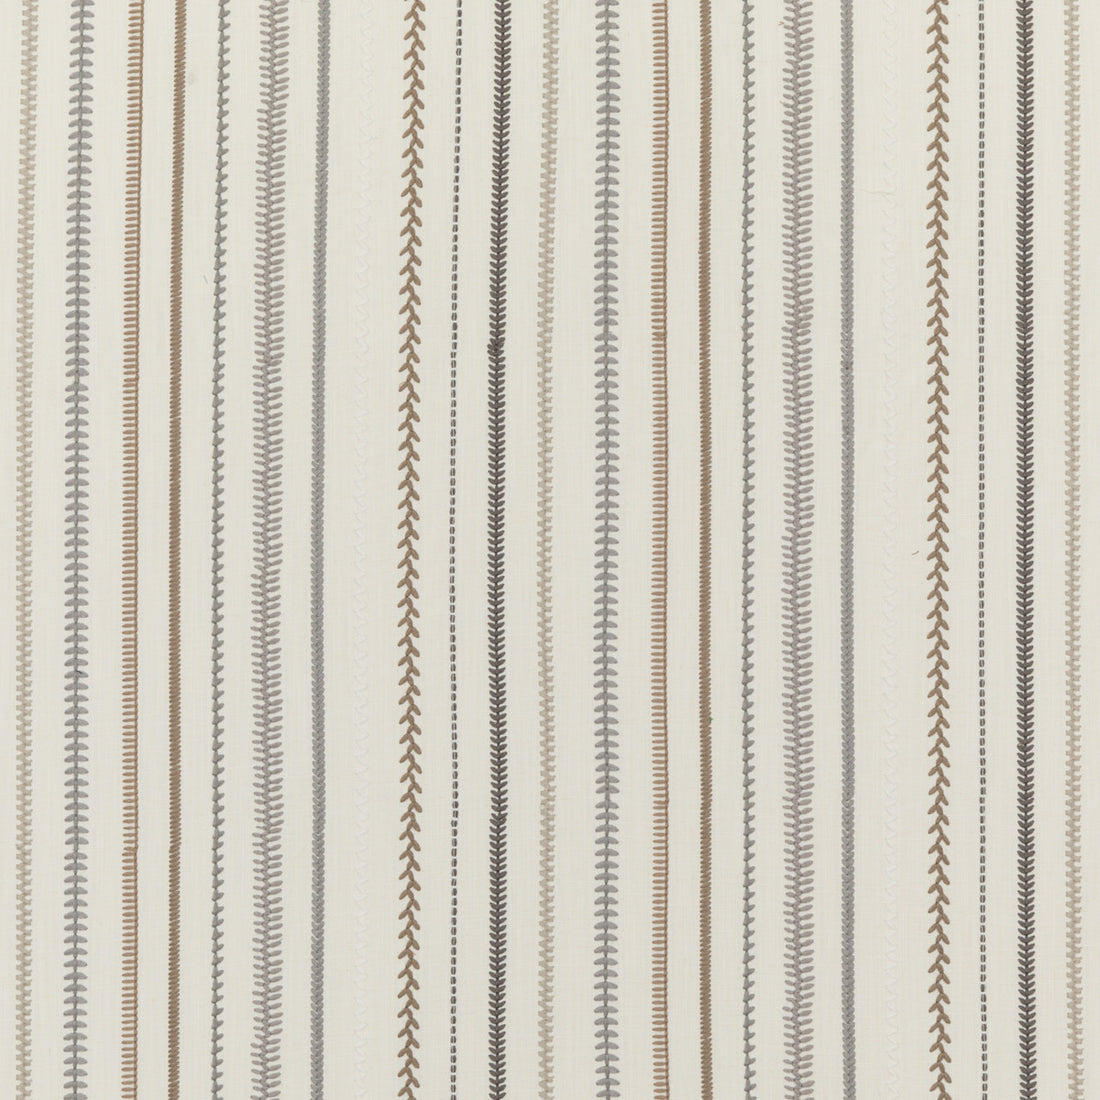 Sintra fabric in stone color - pattern PF50445.2.0 - by Baker Lifestyle in the Homes &amp; Gardens III collection